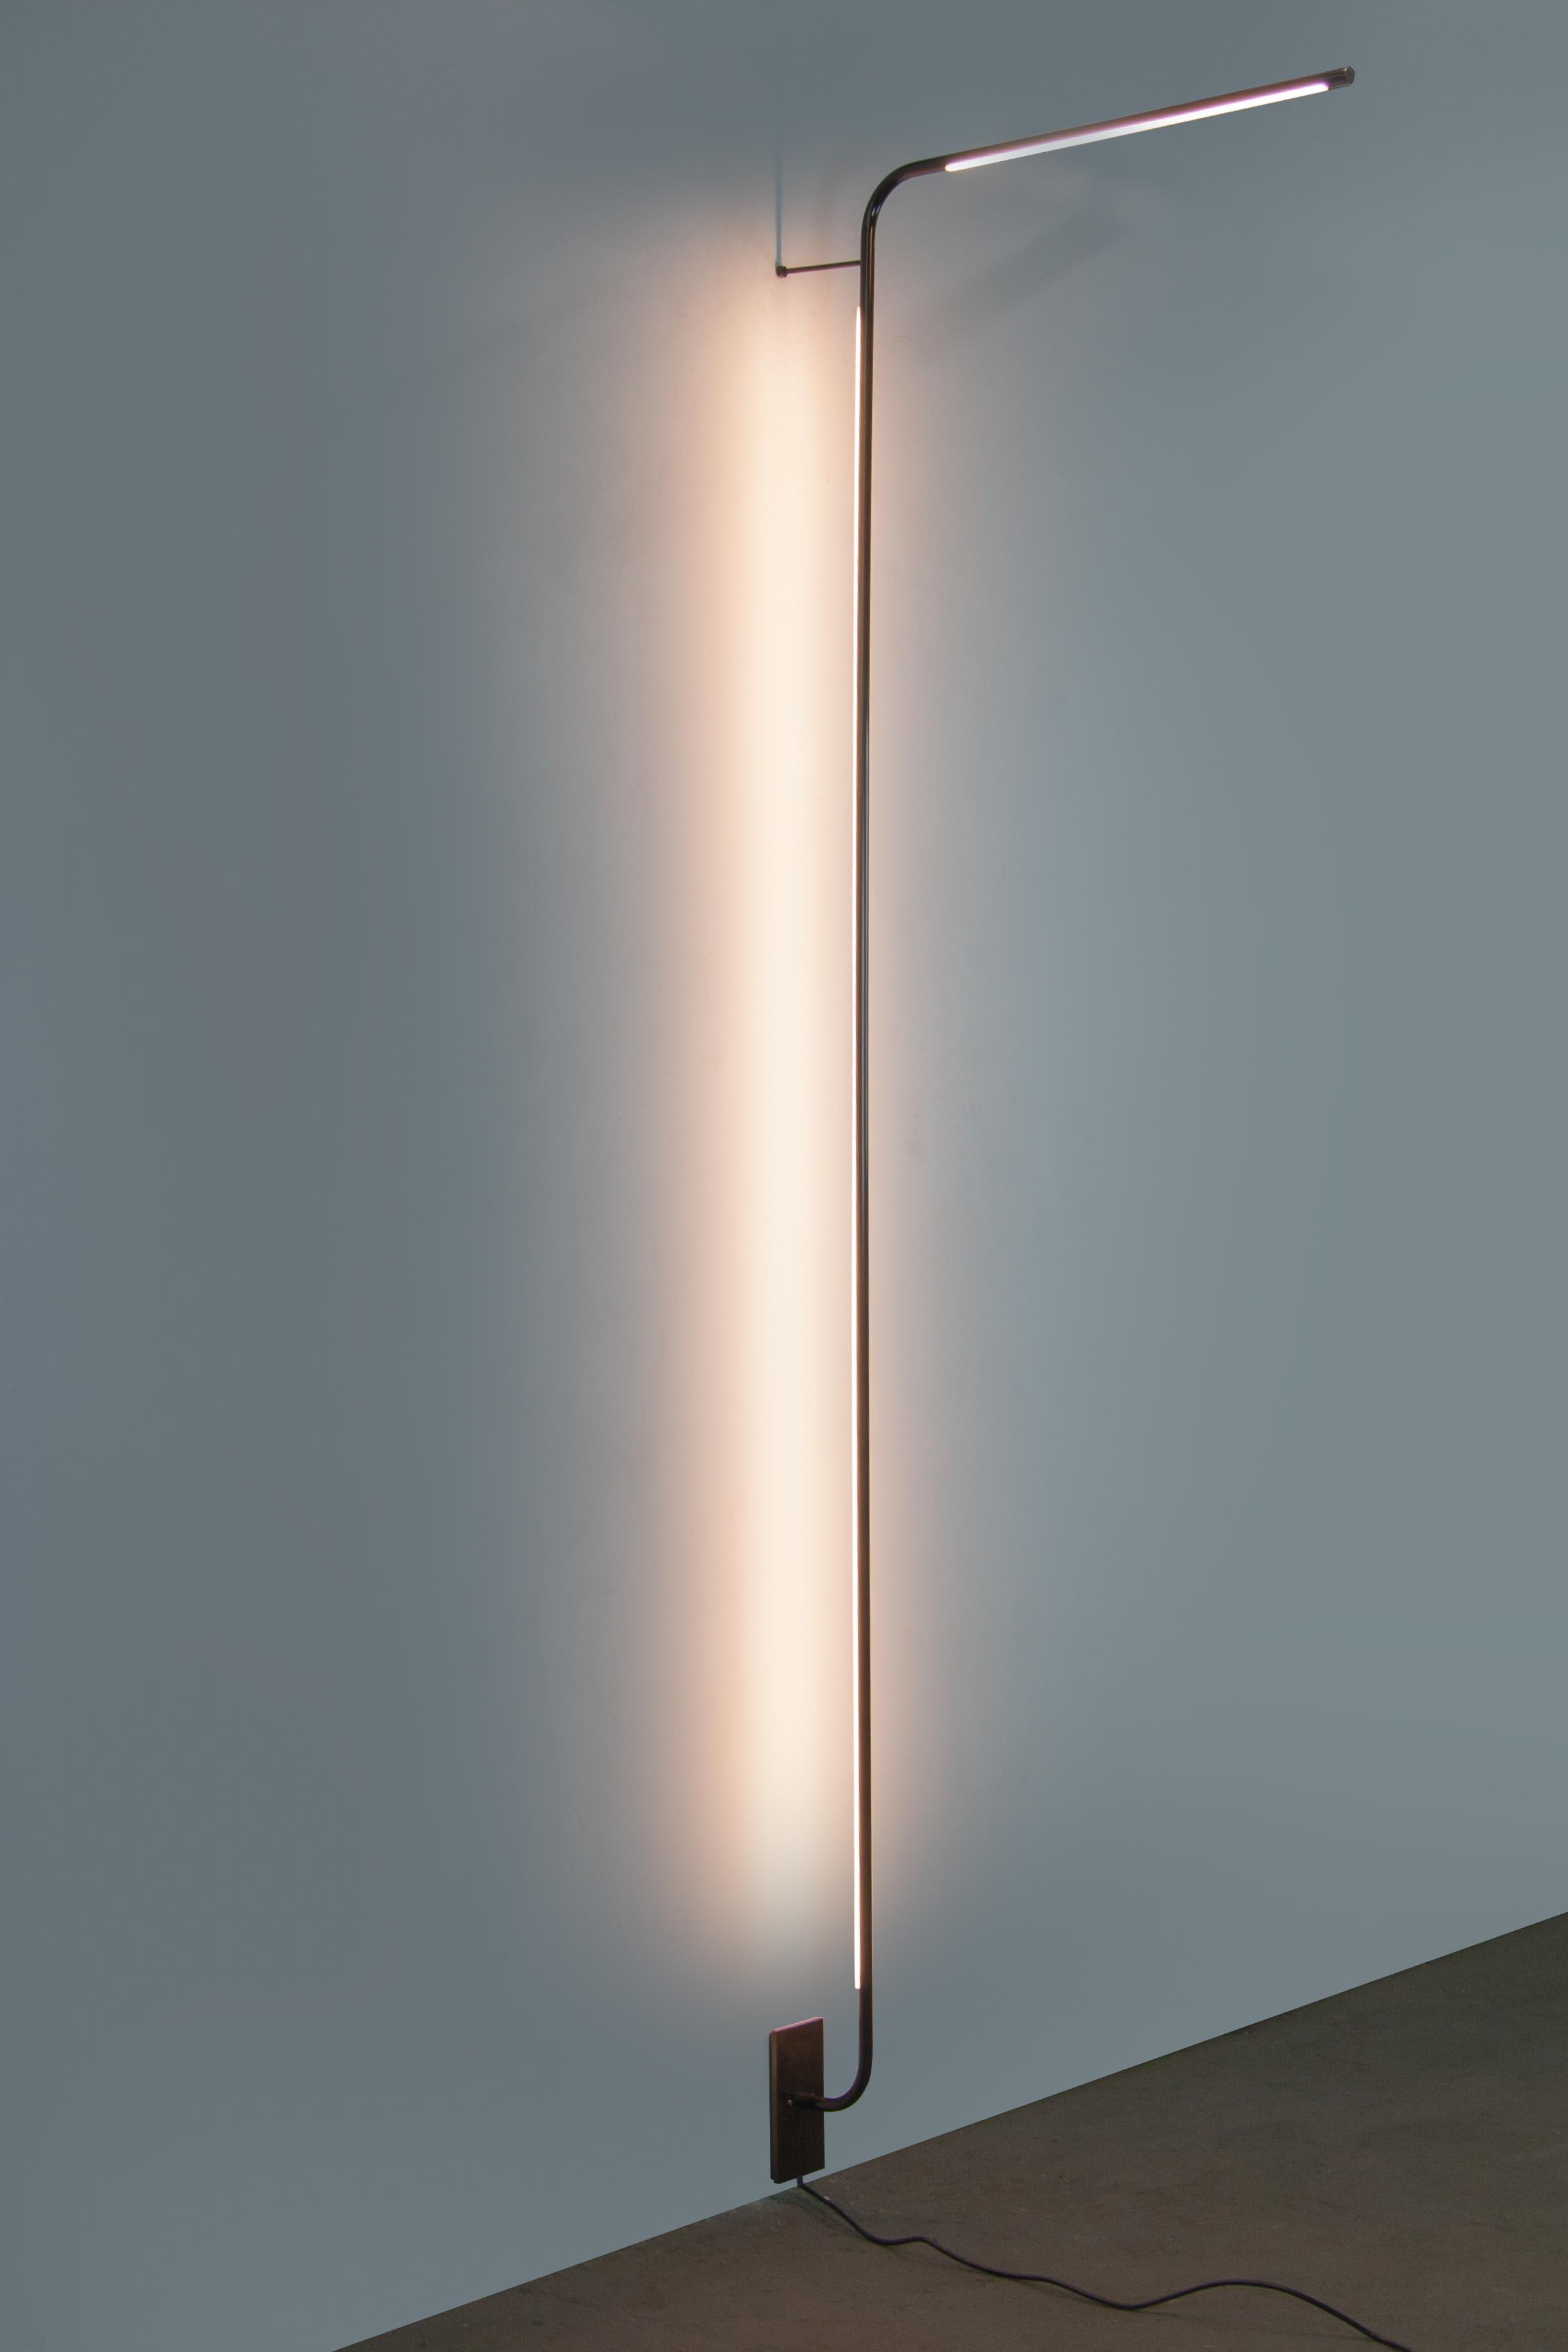 Tube darkened brass wall lamp by Gentner Design
Dimensions: D 68.5 x W 7.5 x H 221 cm
Materials: darkened brass
Available in darkened brass and hand rubbed brass.

All our lamps can be wired according to each country. If sold to the USA it will